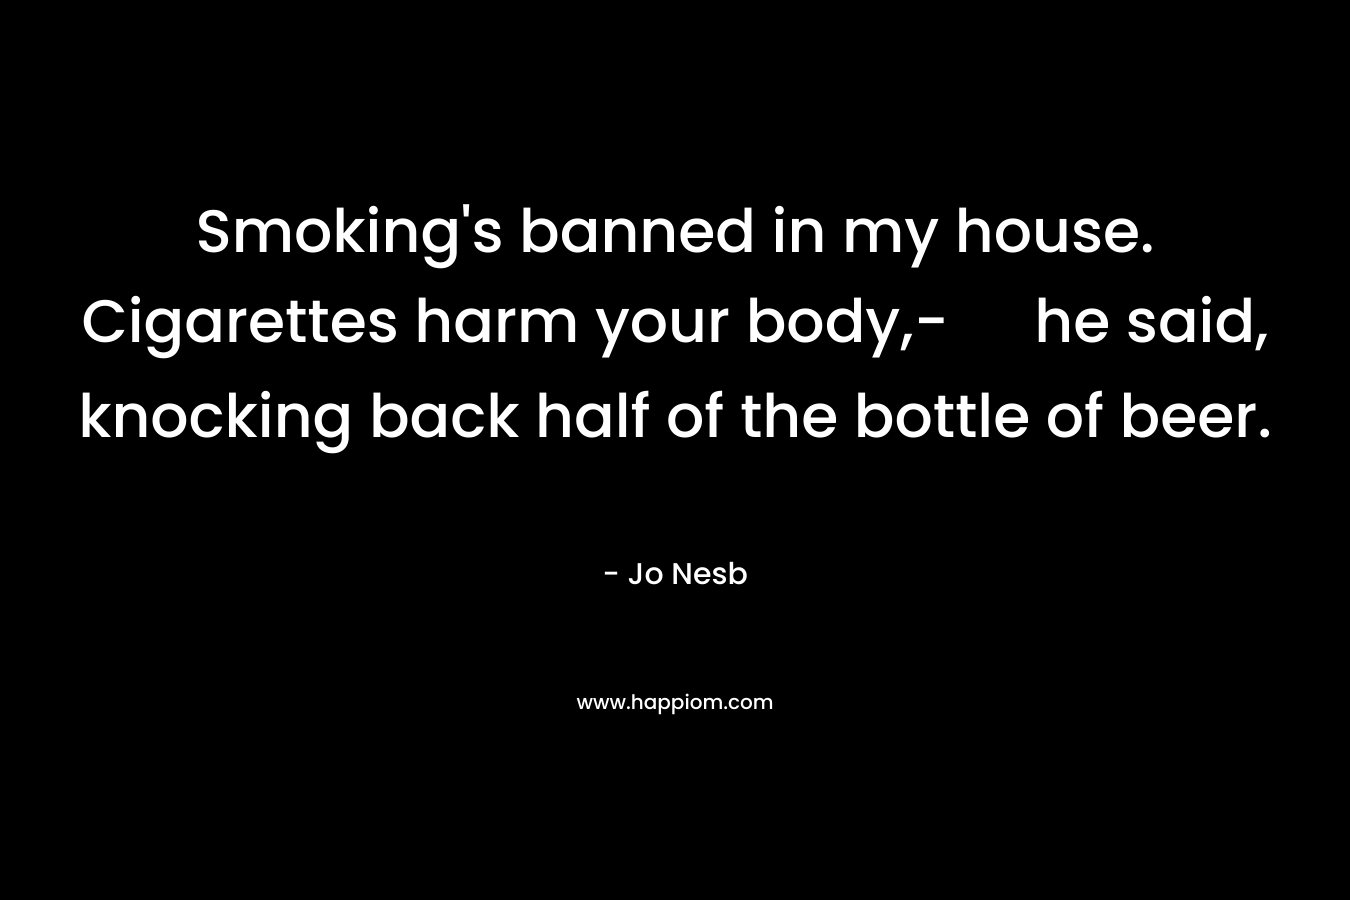 Smoking's banned in my house. Cigarettes harm your body,- he said, knocking back half of the bottle of beer.